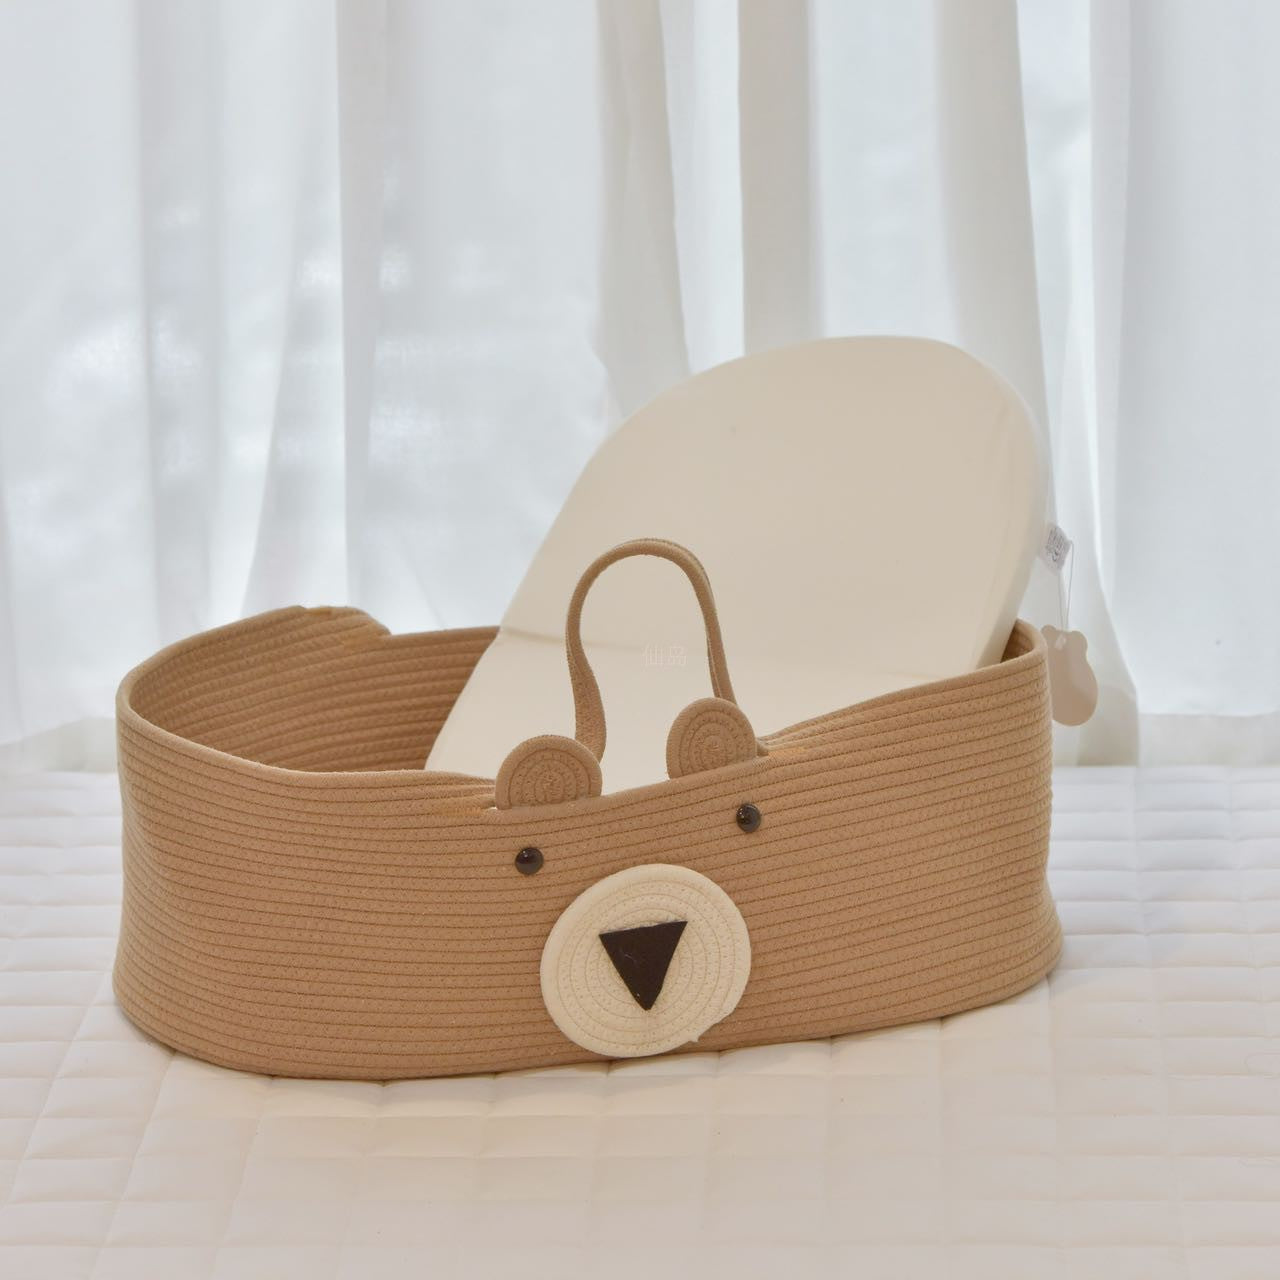 Modern Foldable Cloth Oval Portable Moses Basket without Pad